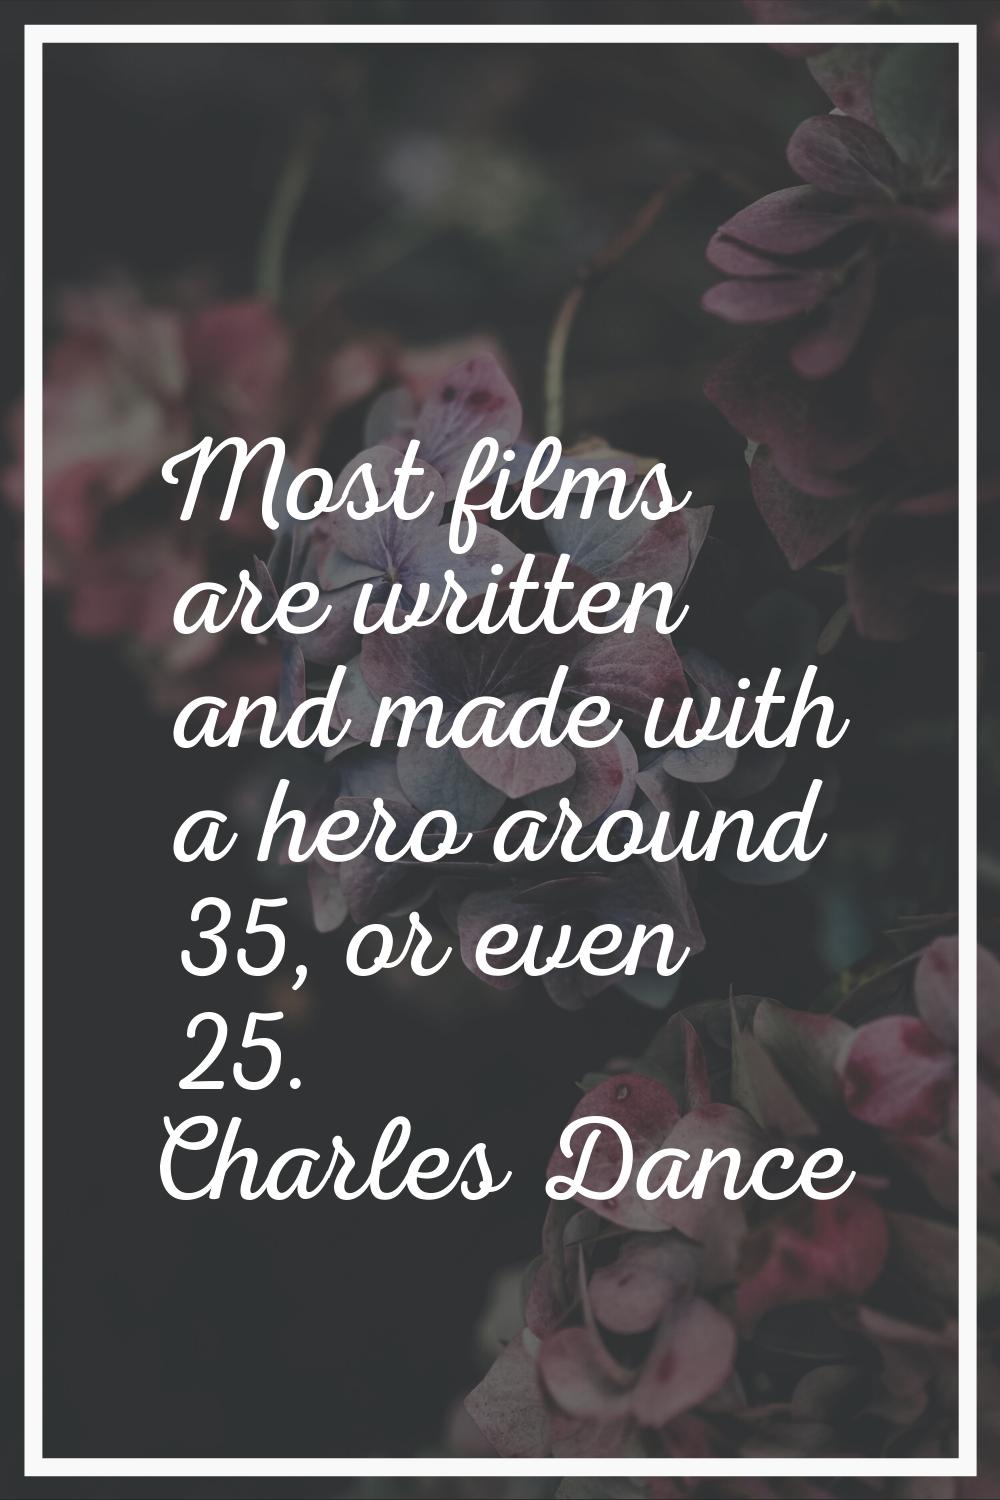 Most films are written and made with a hero around 35, or even 25.